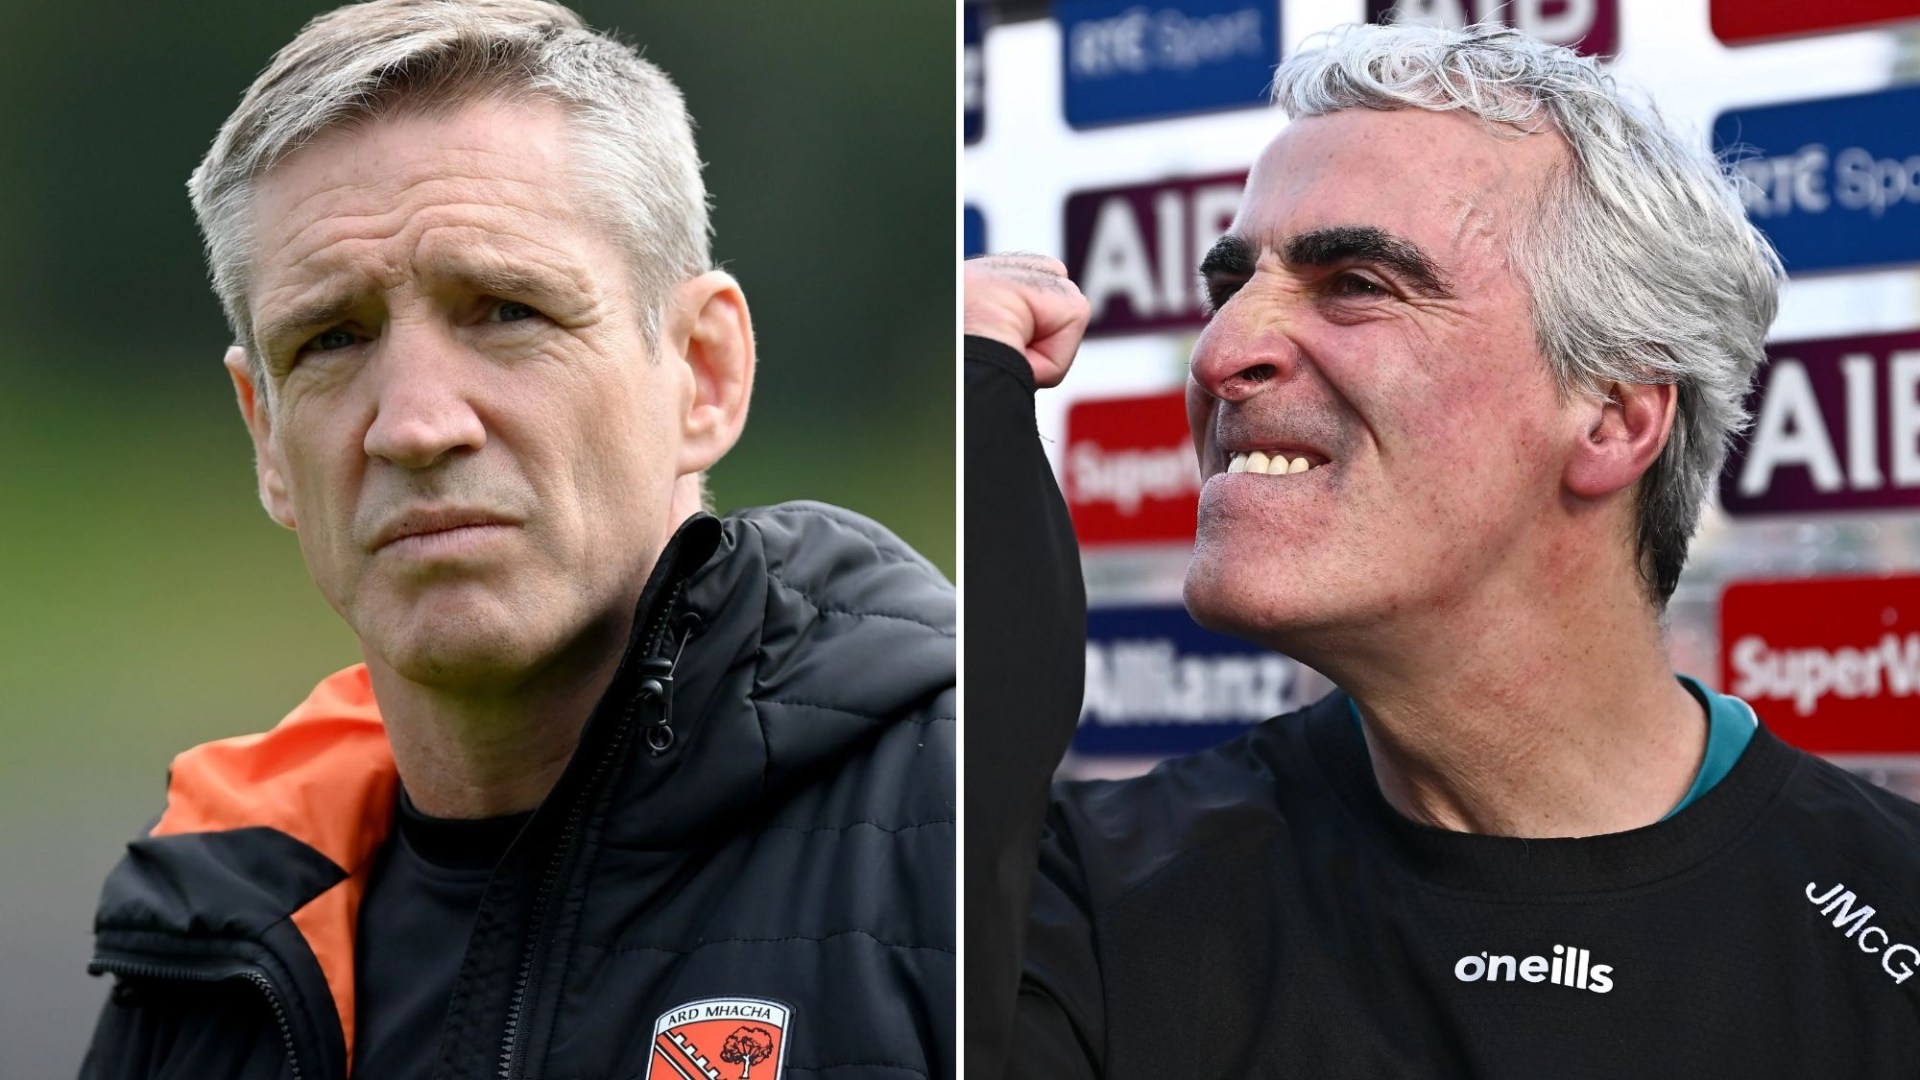 Jim McGuinness and Kieran McGeeney share contrasting but similarly brutally honest reactions after Ulster final [Video]